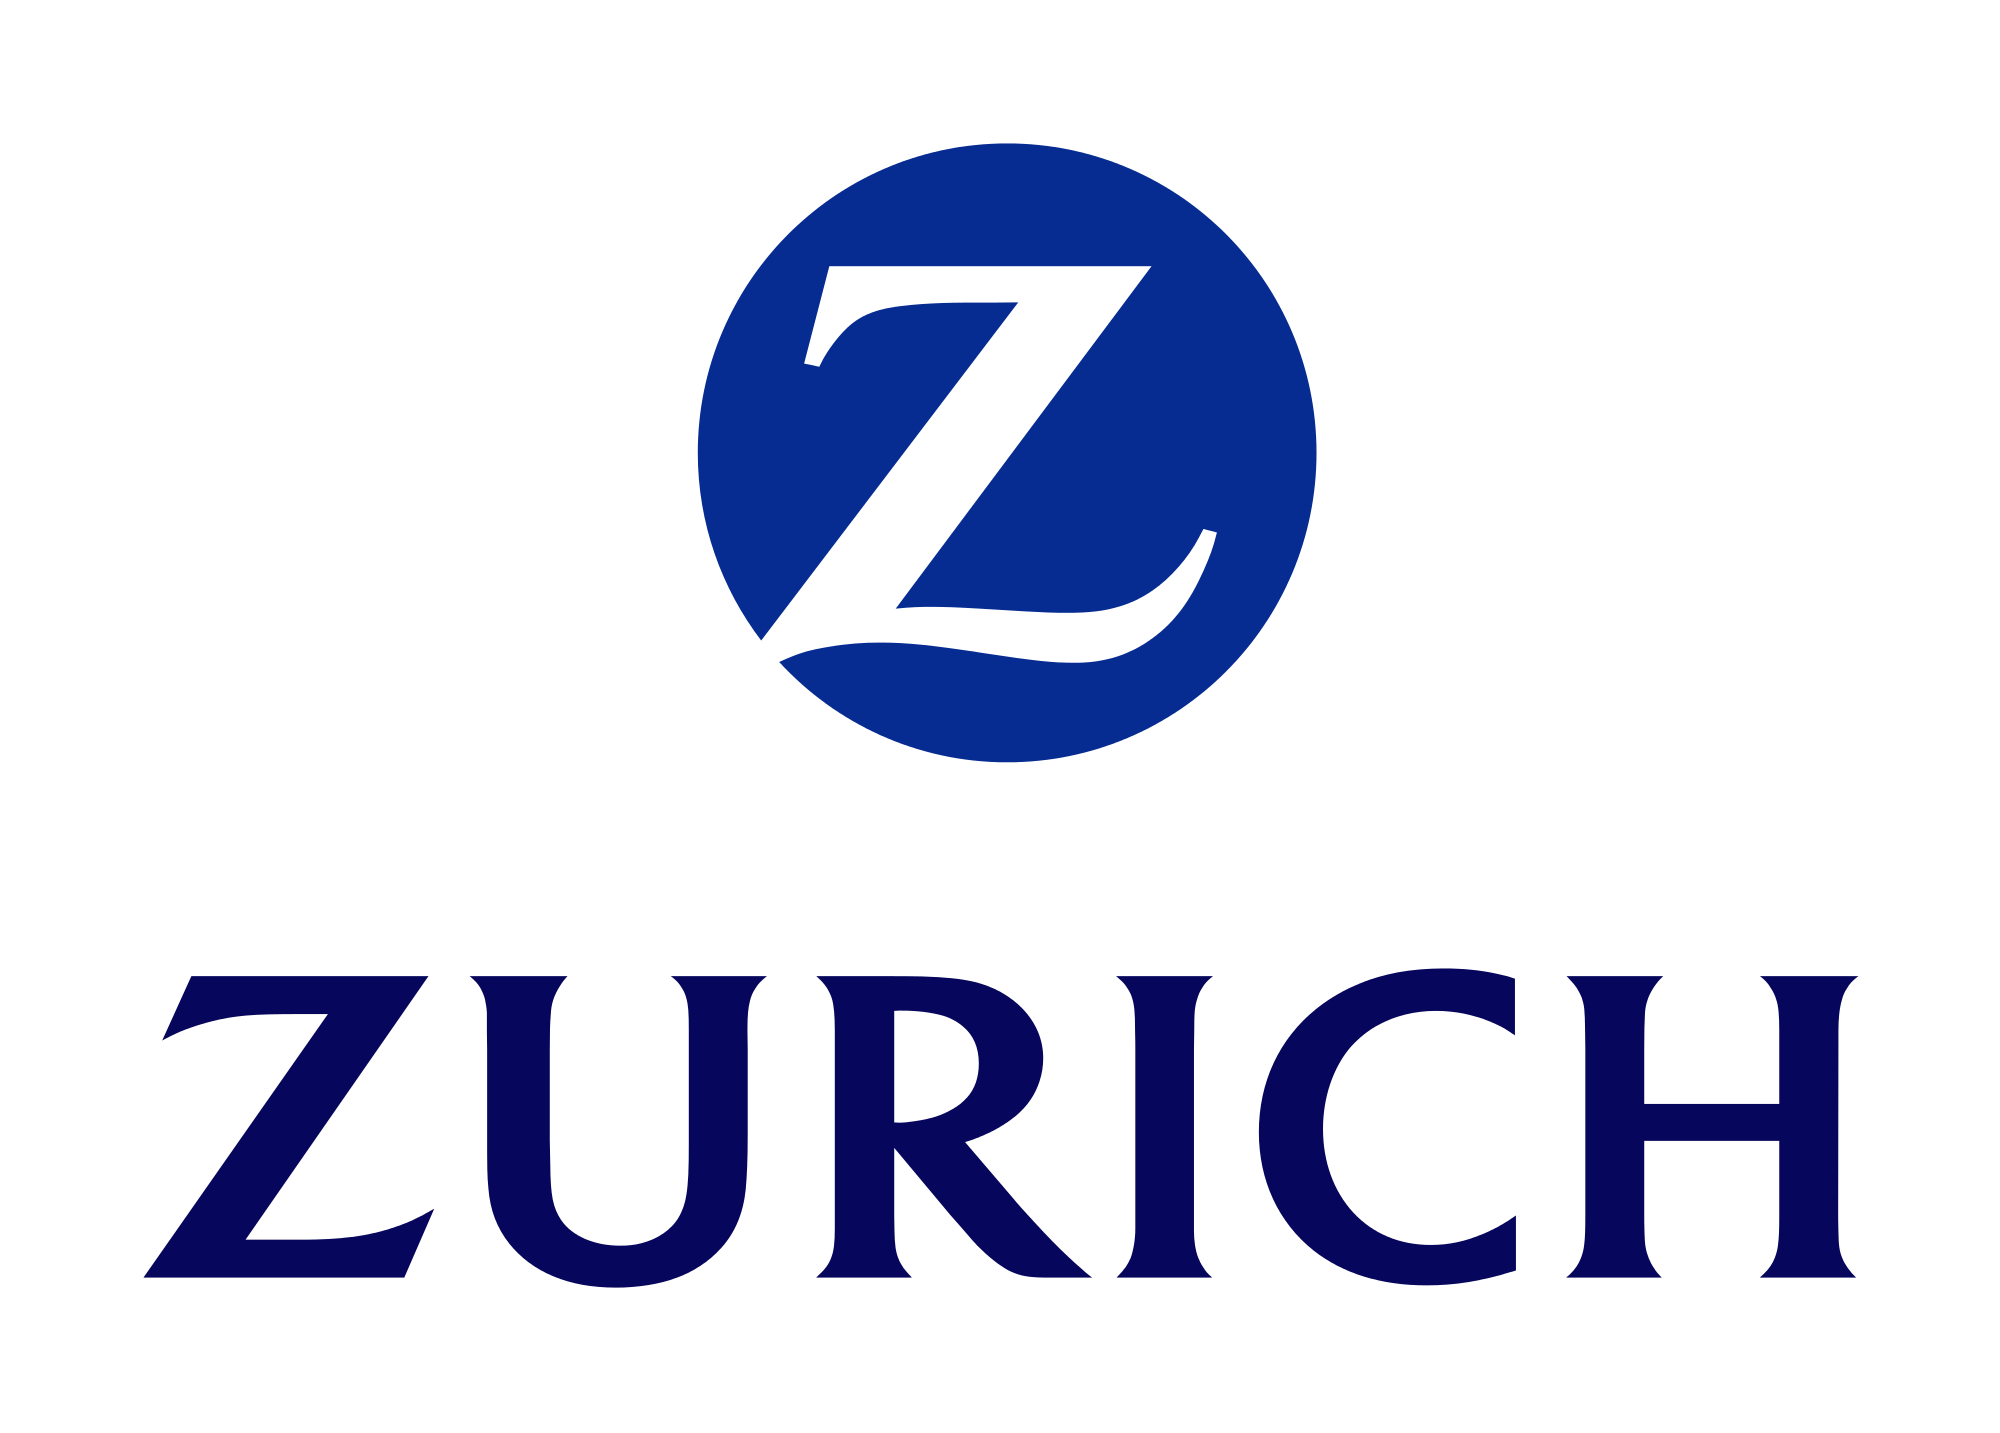 Zurich makes key leadership appointments, launches digital unit